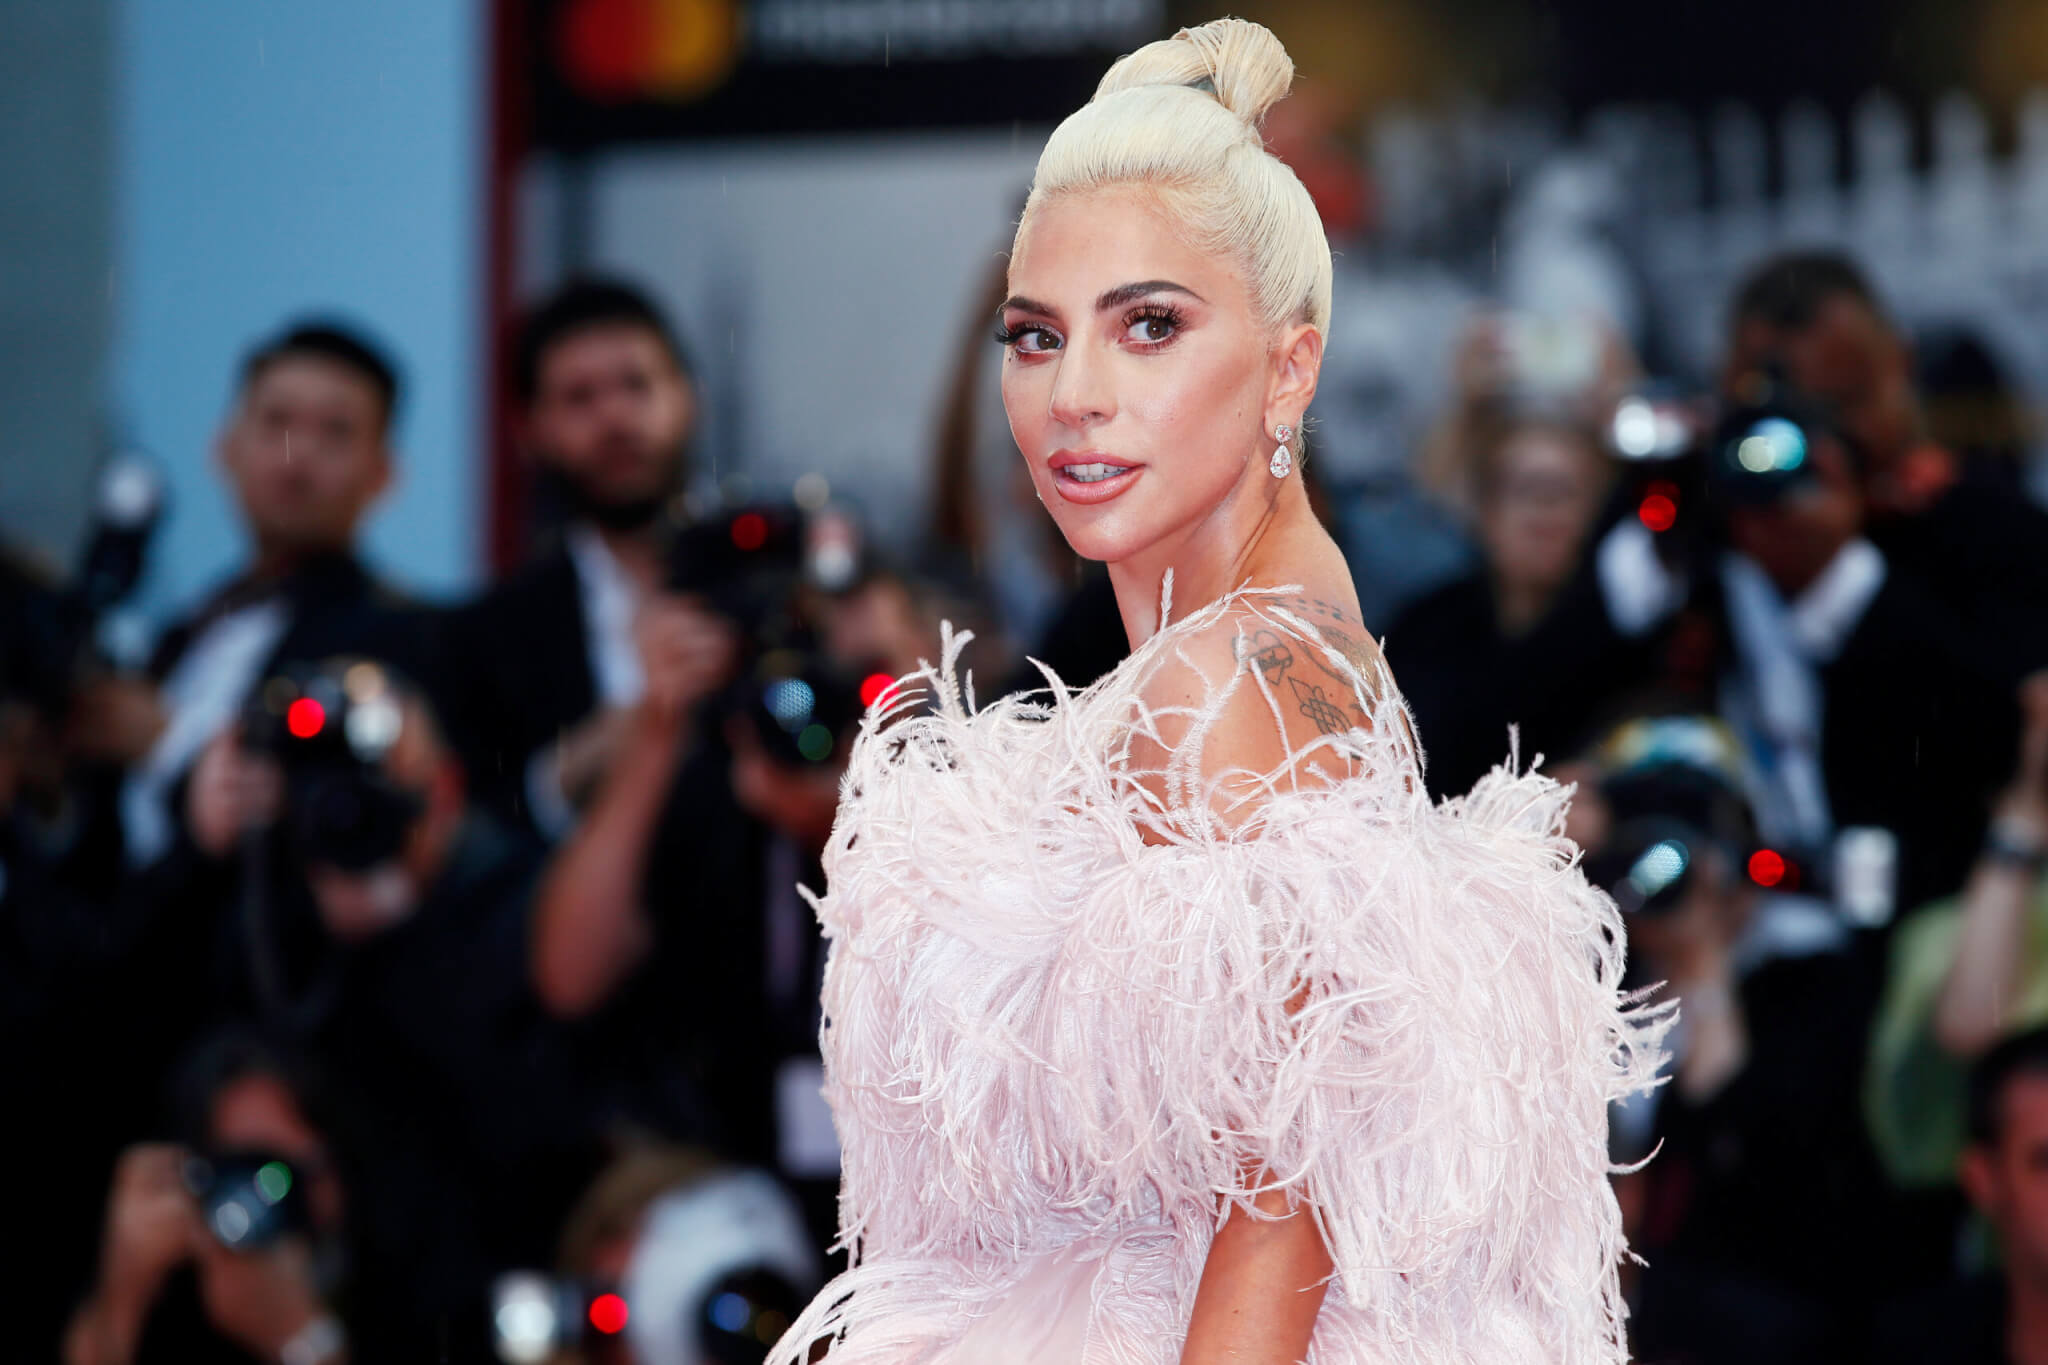 Lady Gaga on the carpet premiering "A Star is Born" in 2018